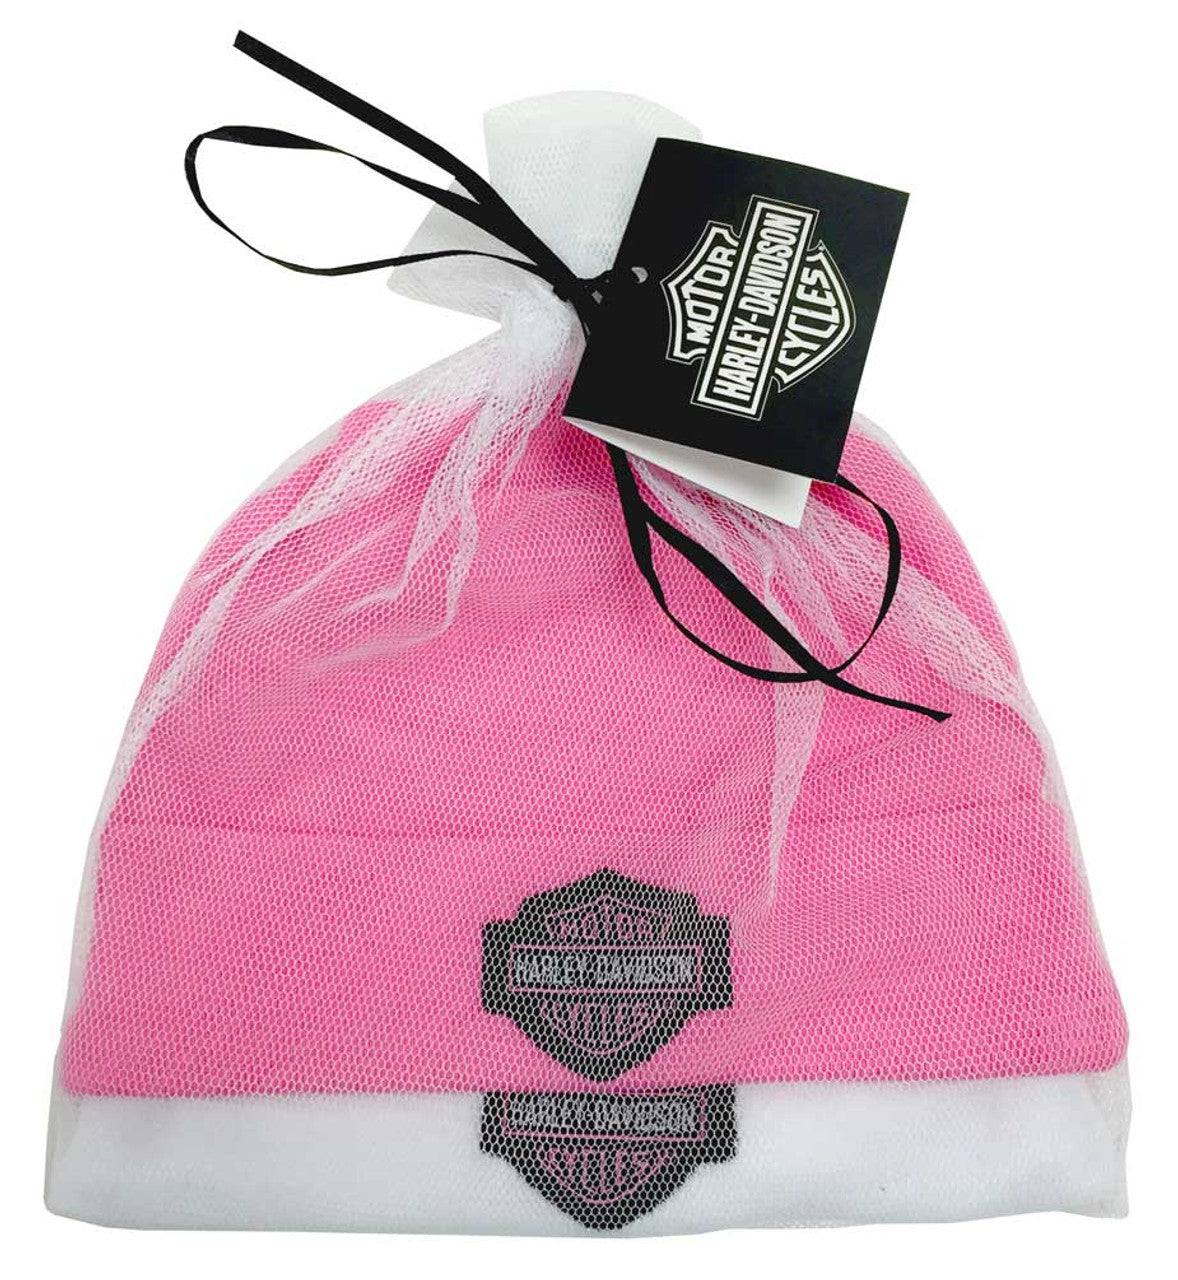 Harley-Davidson® Baby Girls' Embroidered B&S Hats - 2 Pack Gift Set